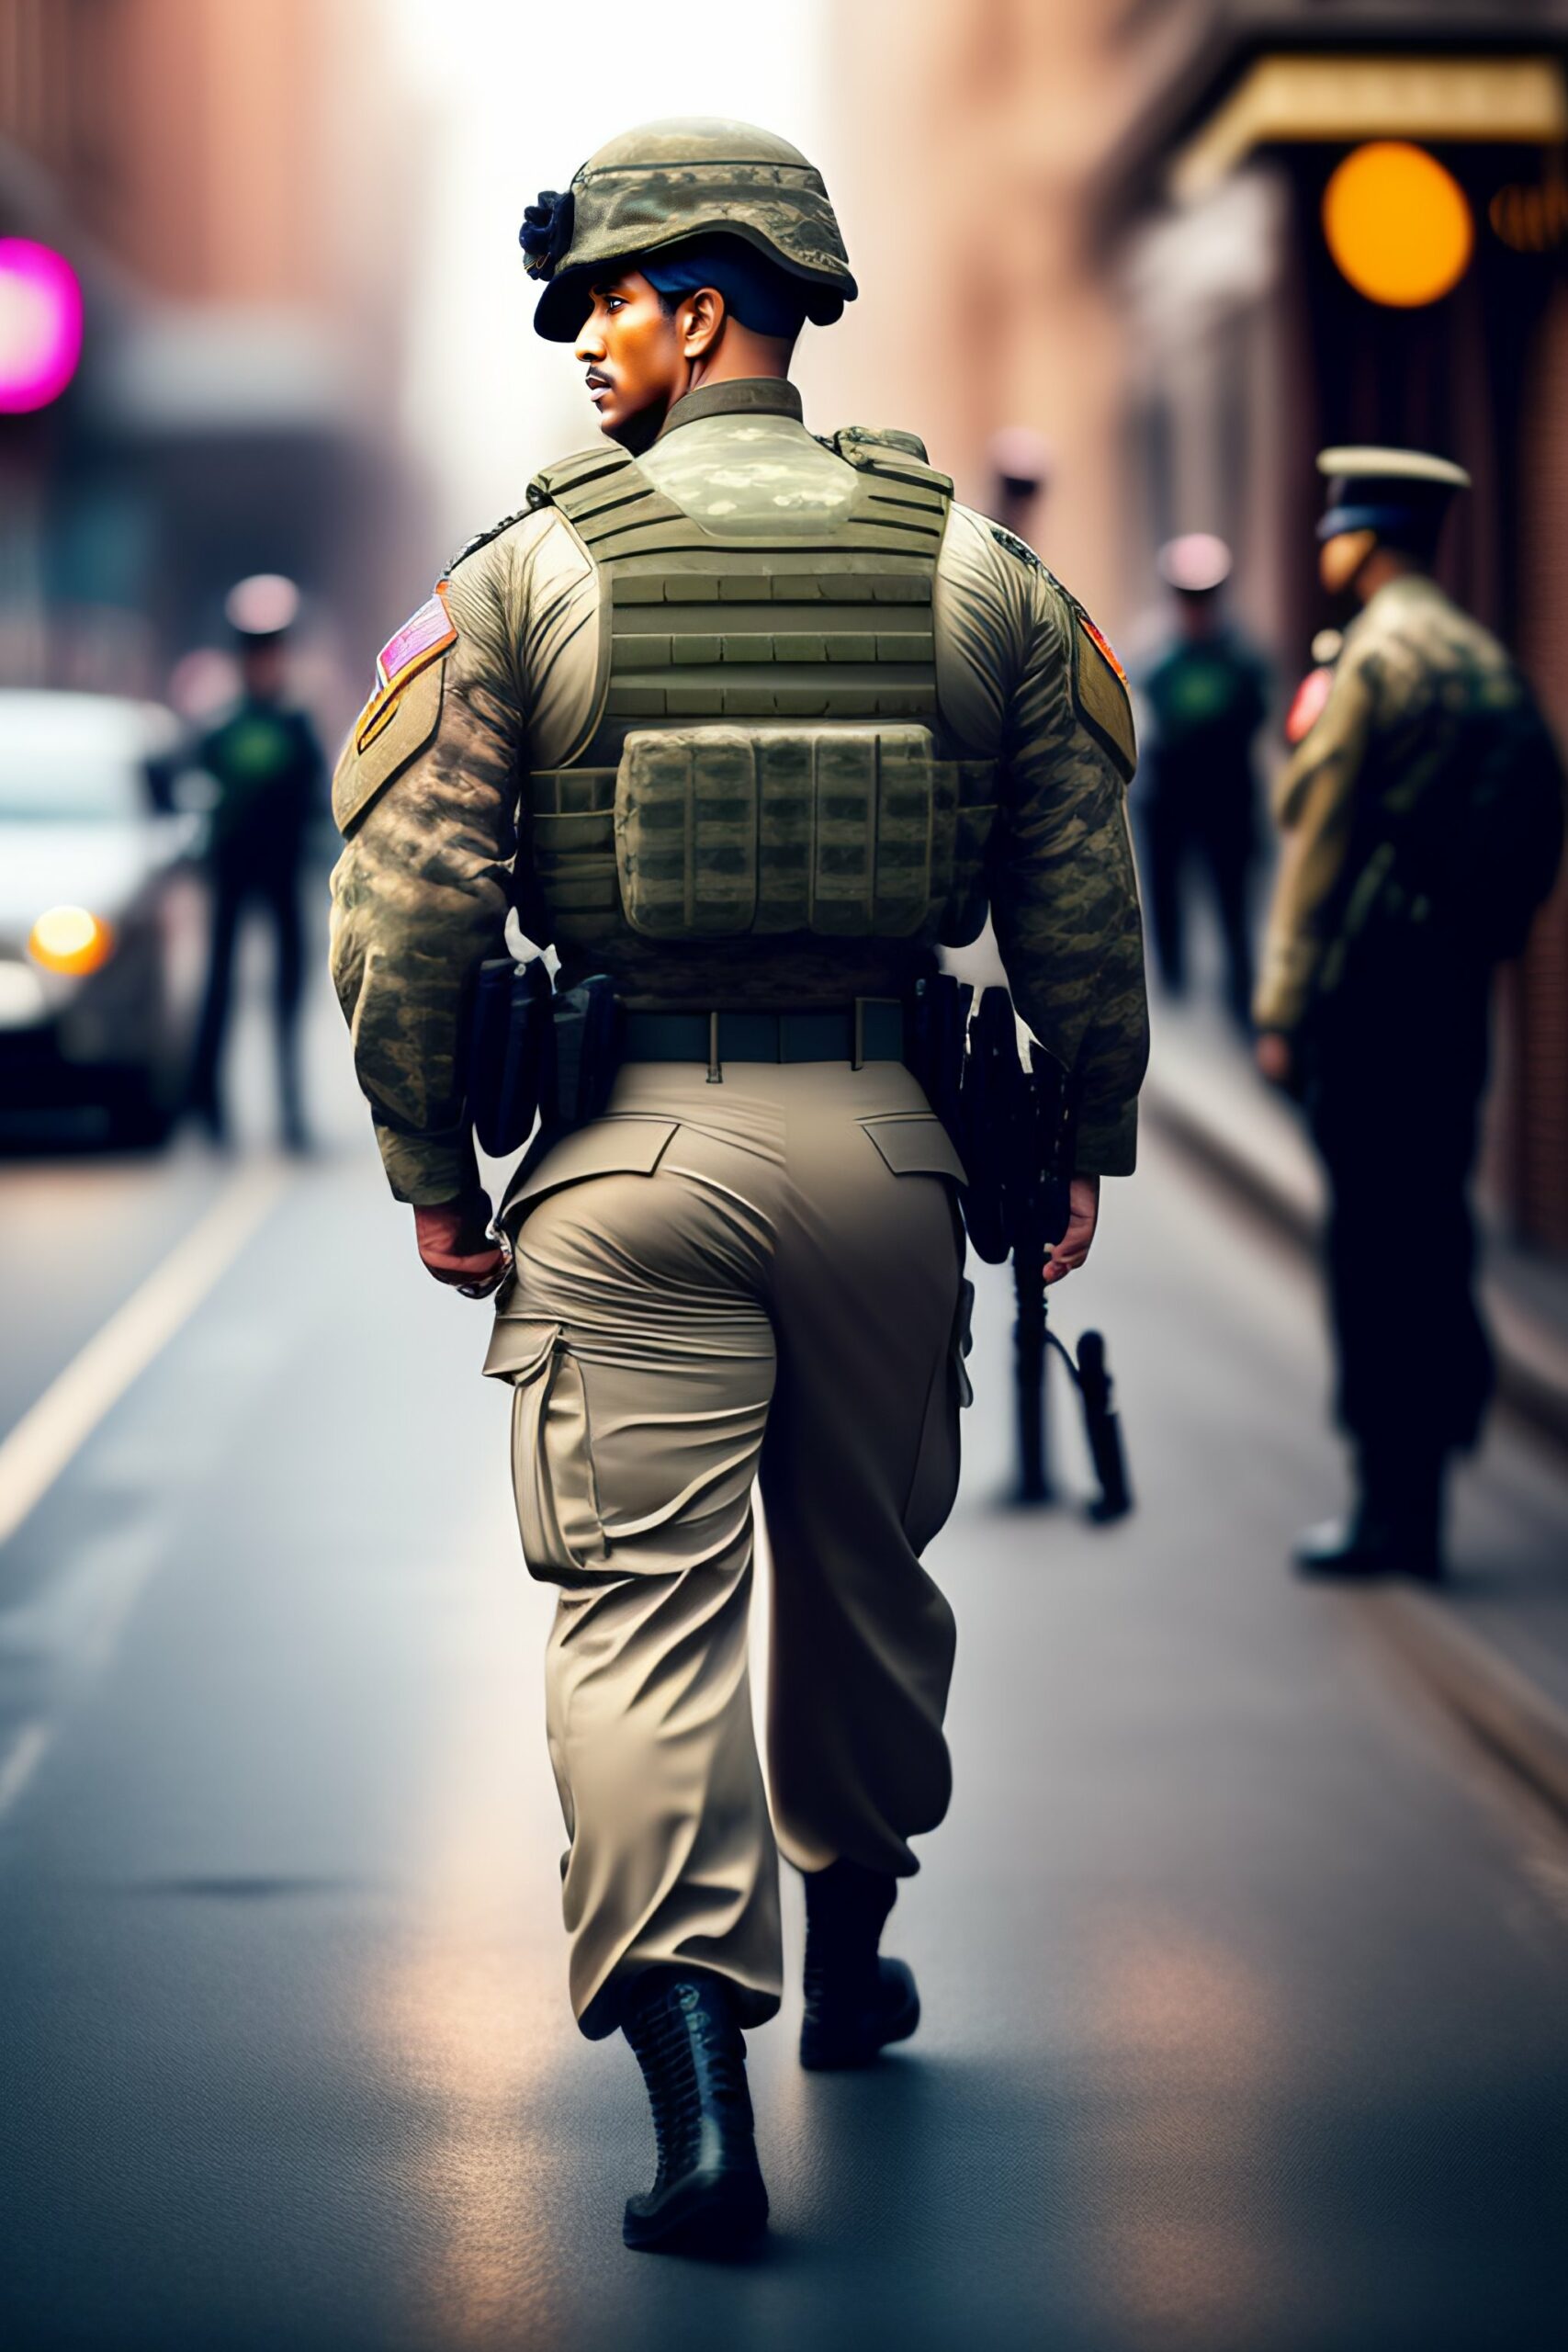 The Role of Special Operations in Counterterrorism